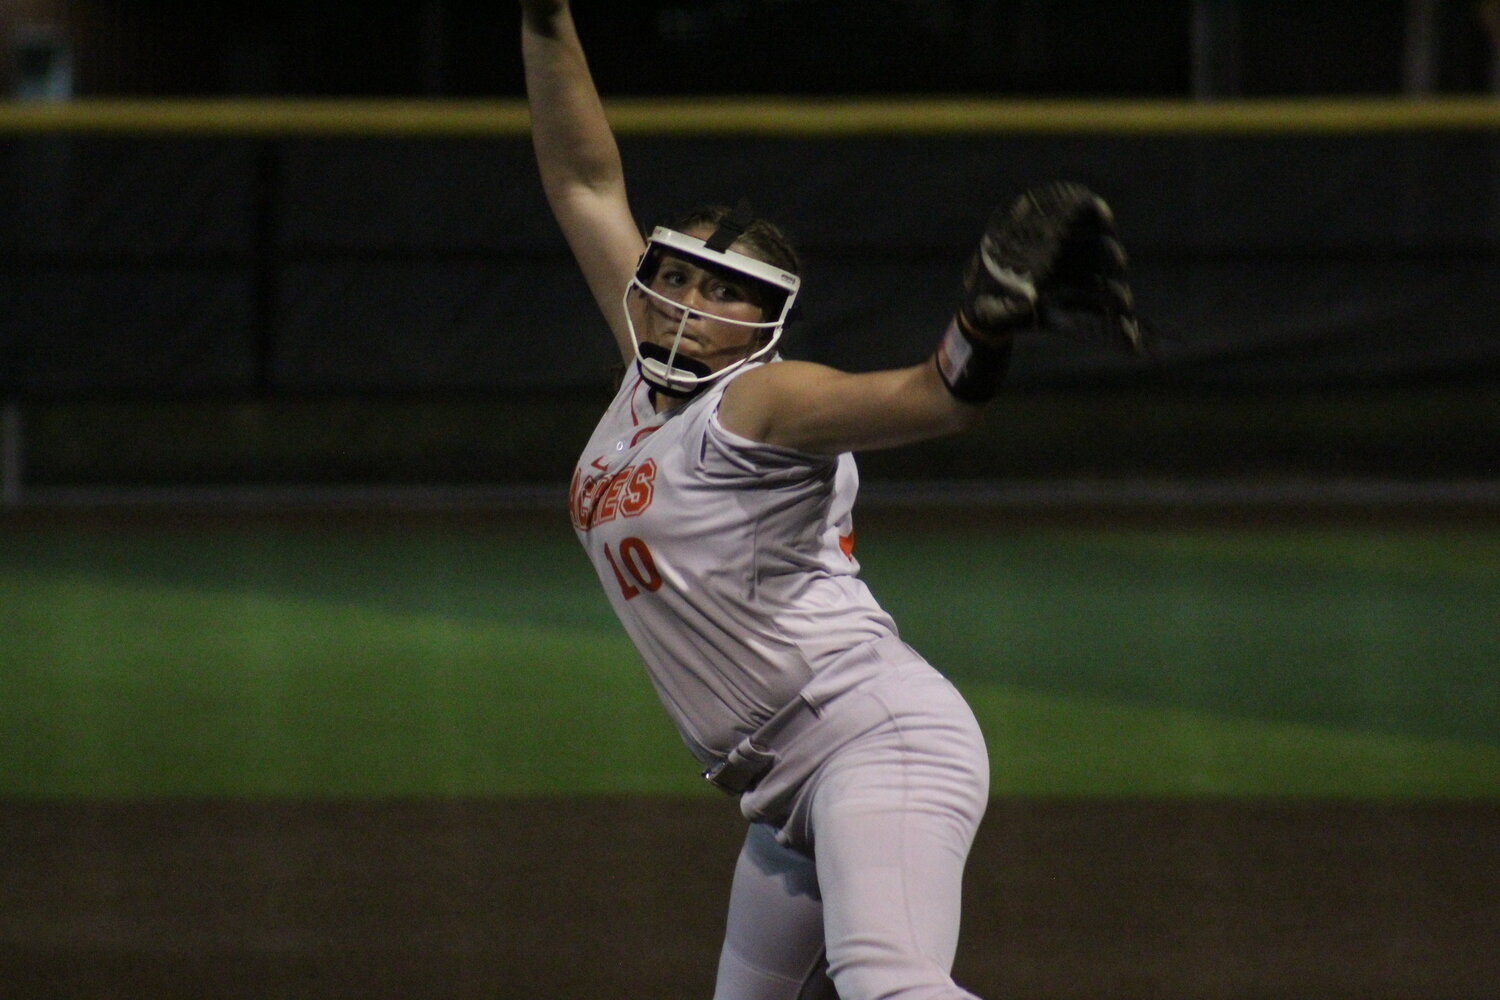 Gonzales freshman pitcher Dixie Rae Lester (10) pitches for the Lady Apaches in the area match against Needville Thursday, May 2. Lester struck out 10 Needville batters in the area round loss to the Lady Bluejays.